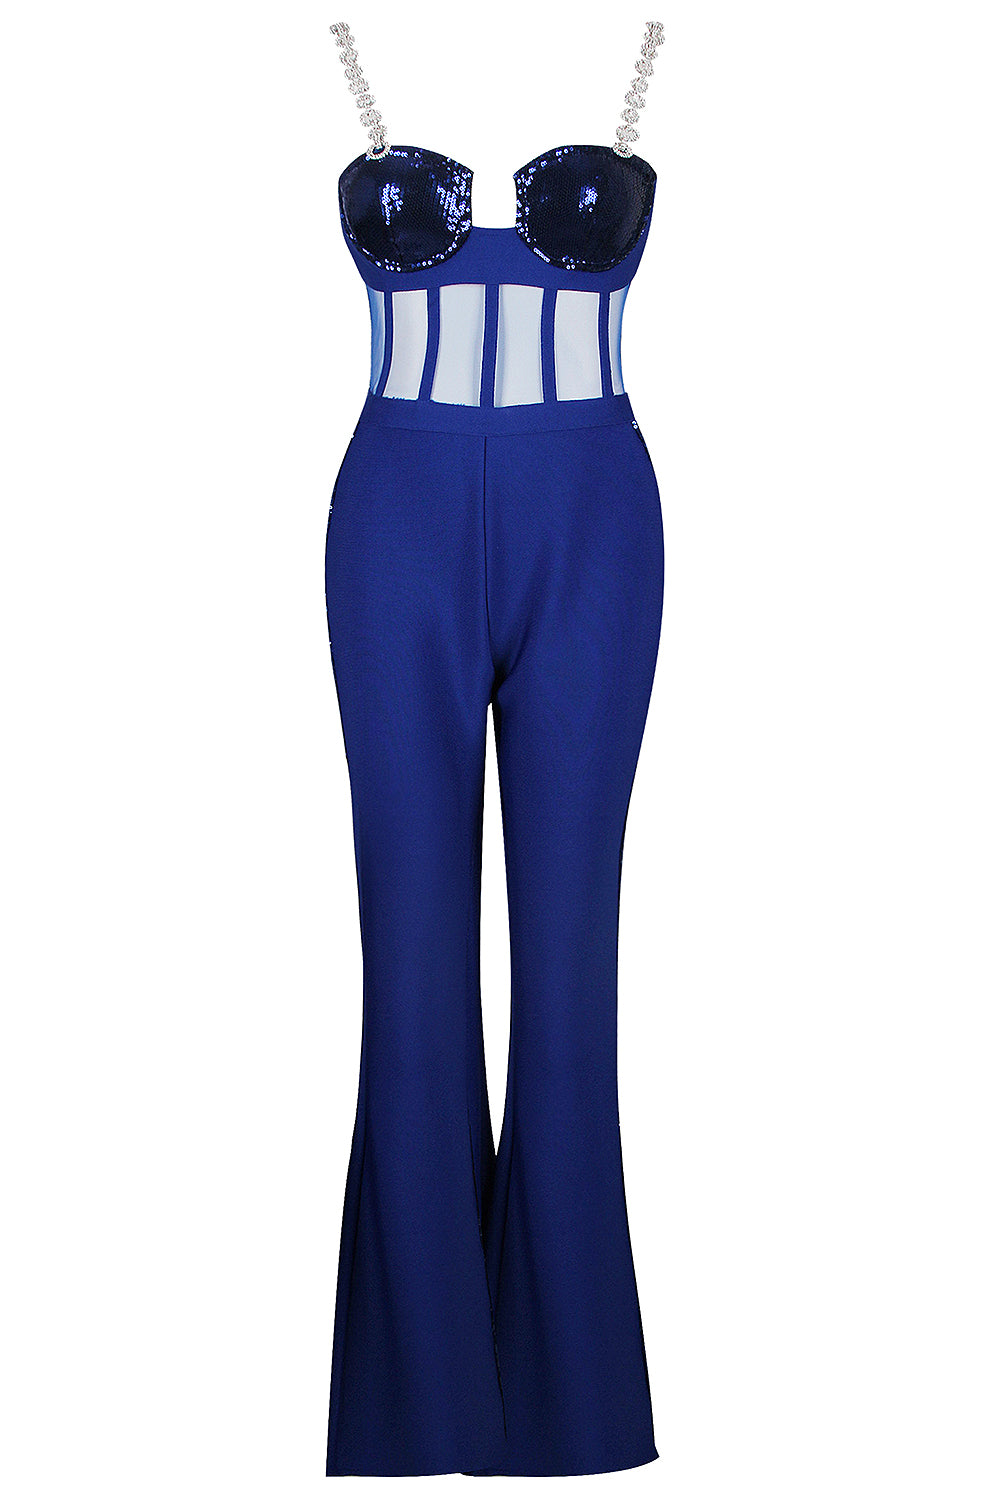 Strappy Sequin Hollow Bandage Flare Jumpsuit In Black Blue - Chicida